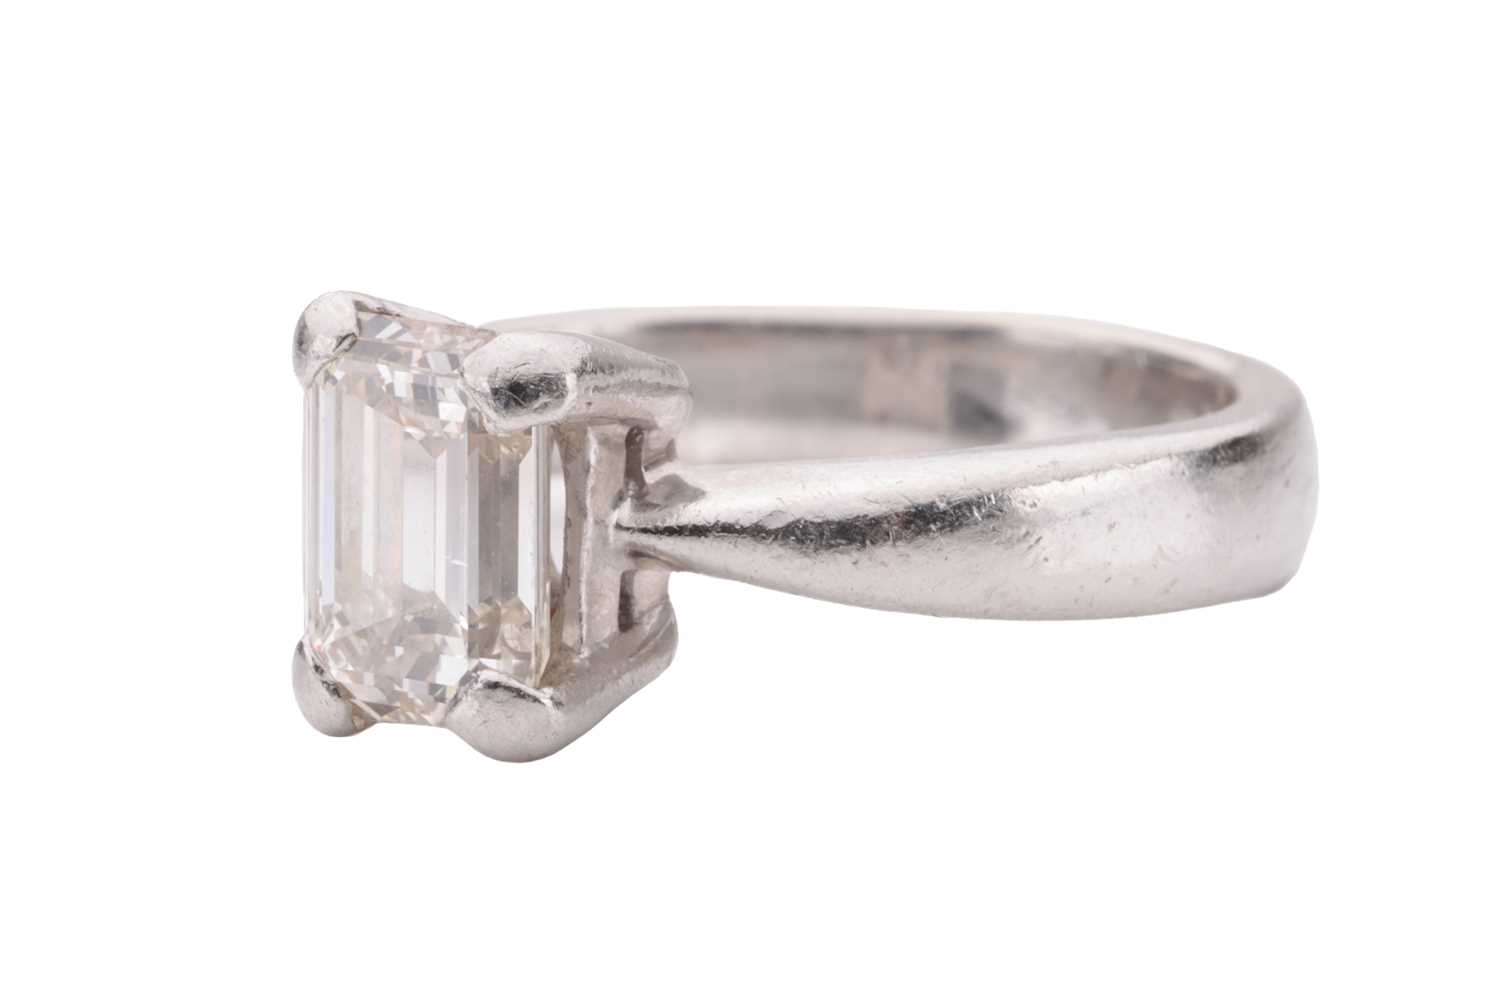 A diamond solitaire ring, set with an emerald-cut diamond with an estimated weight of 1.20ct, in a c - Image 3 of 4